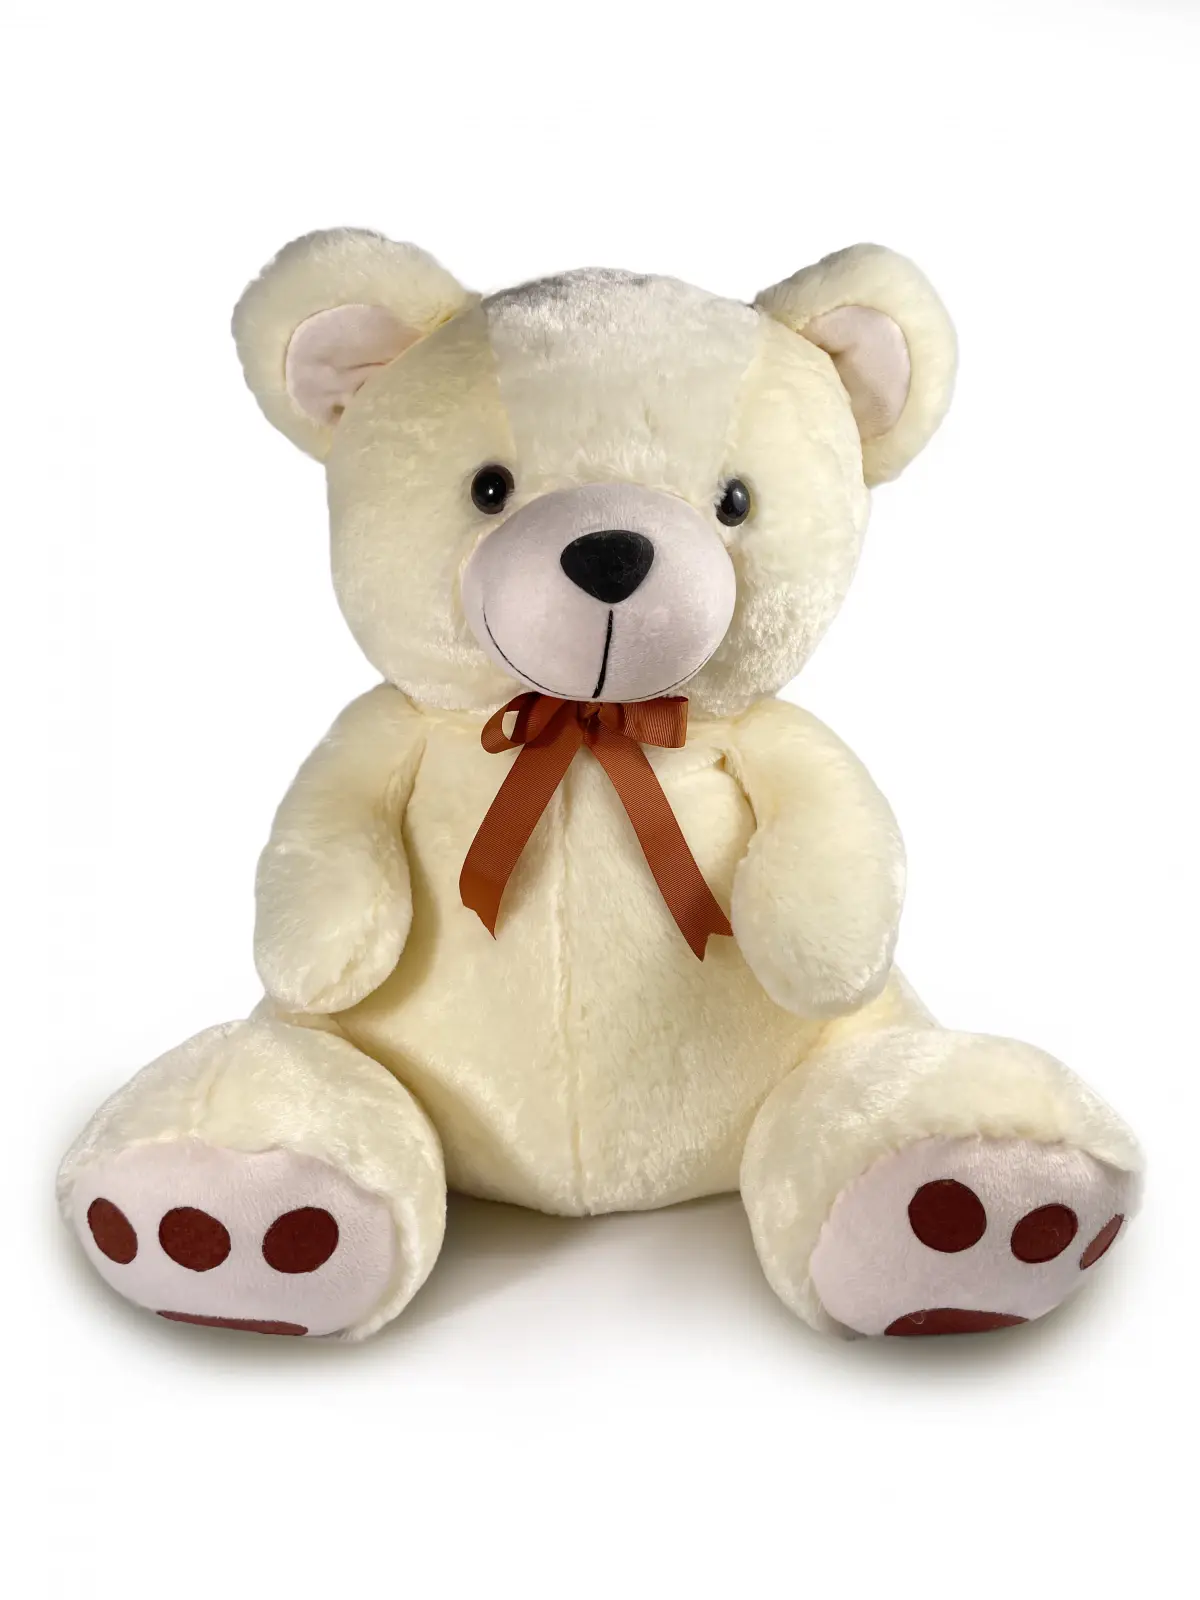 Soft Plush Stuffed Jumbo Cuddly Teddy Bear By Mirada Soft Toys For Kids Of All Ages, 55Cm - Butter, 3Y+